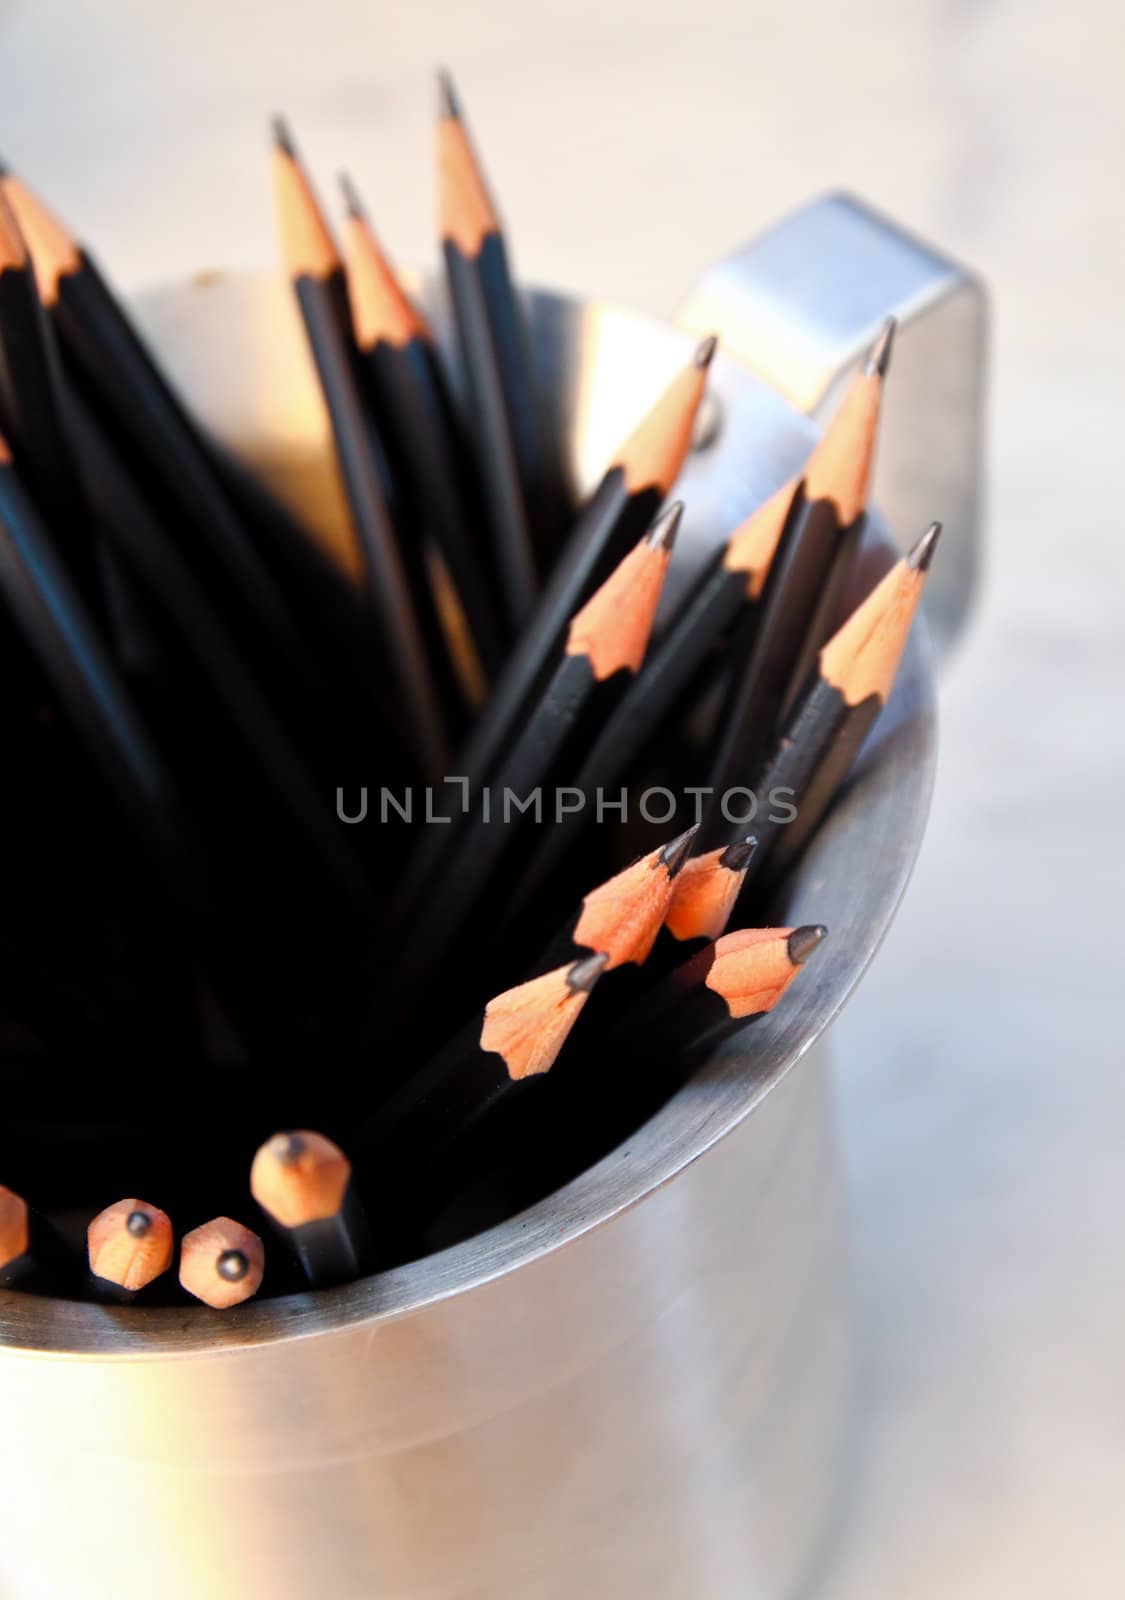 Bunch of pencils on cup by nuchylee